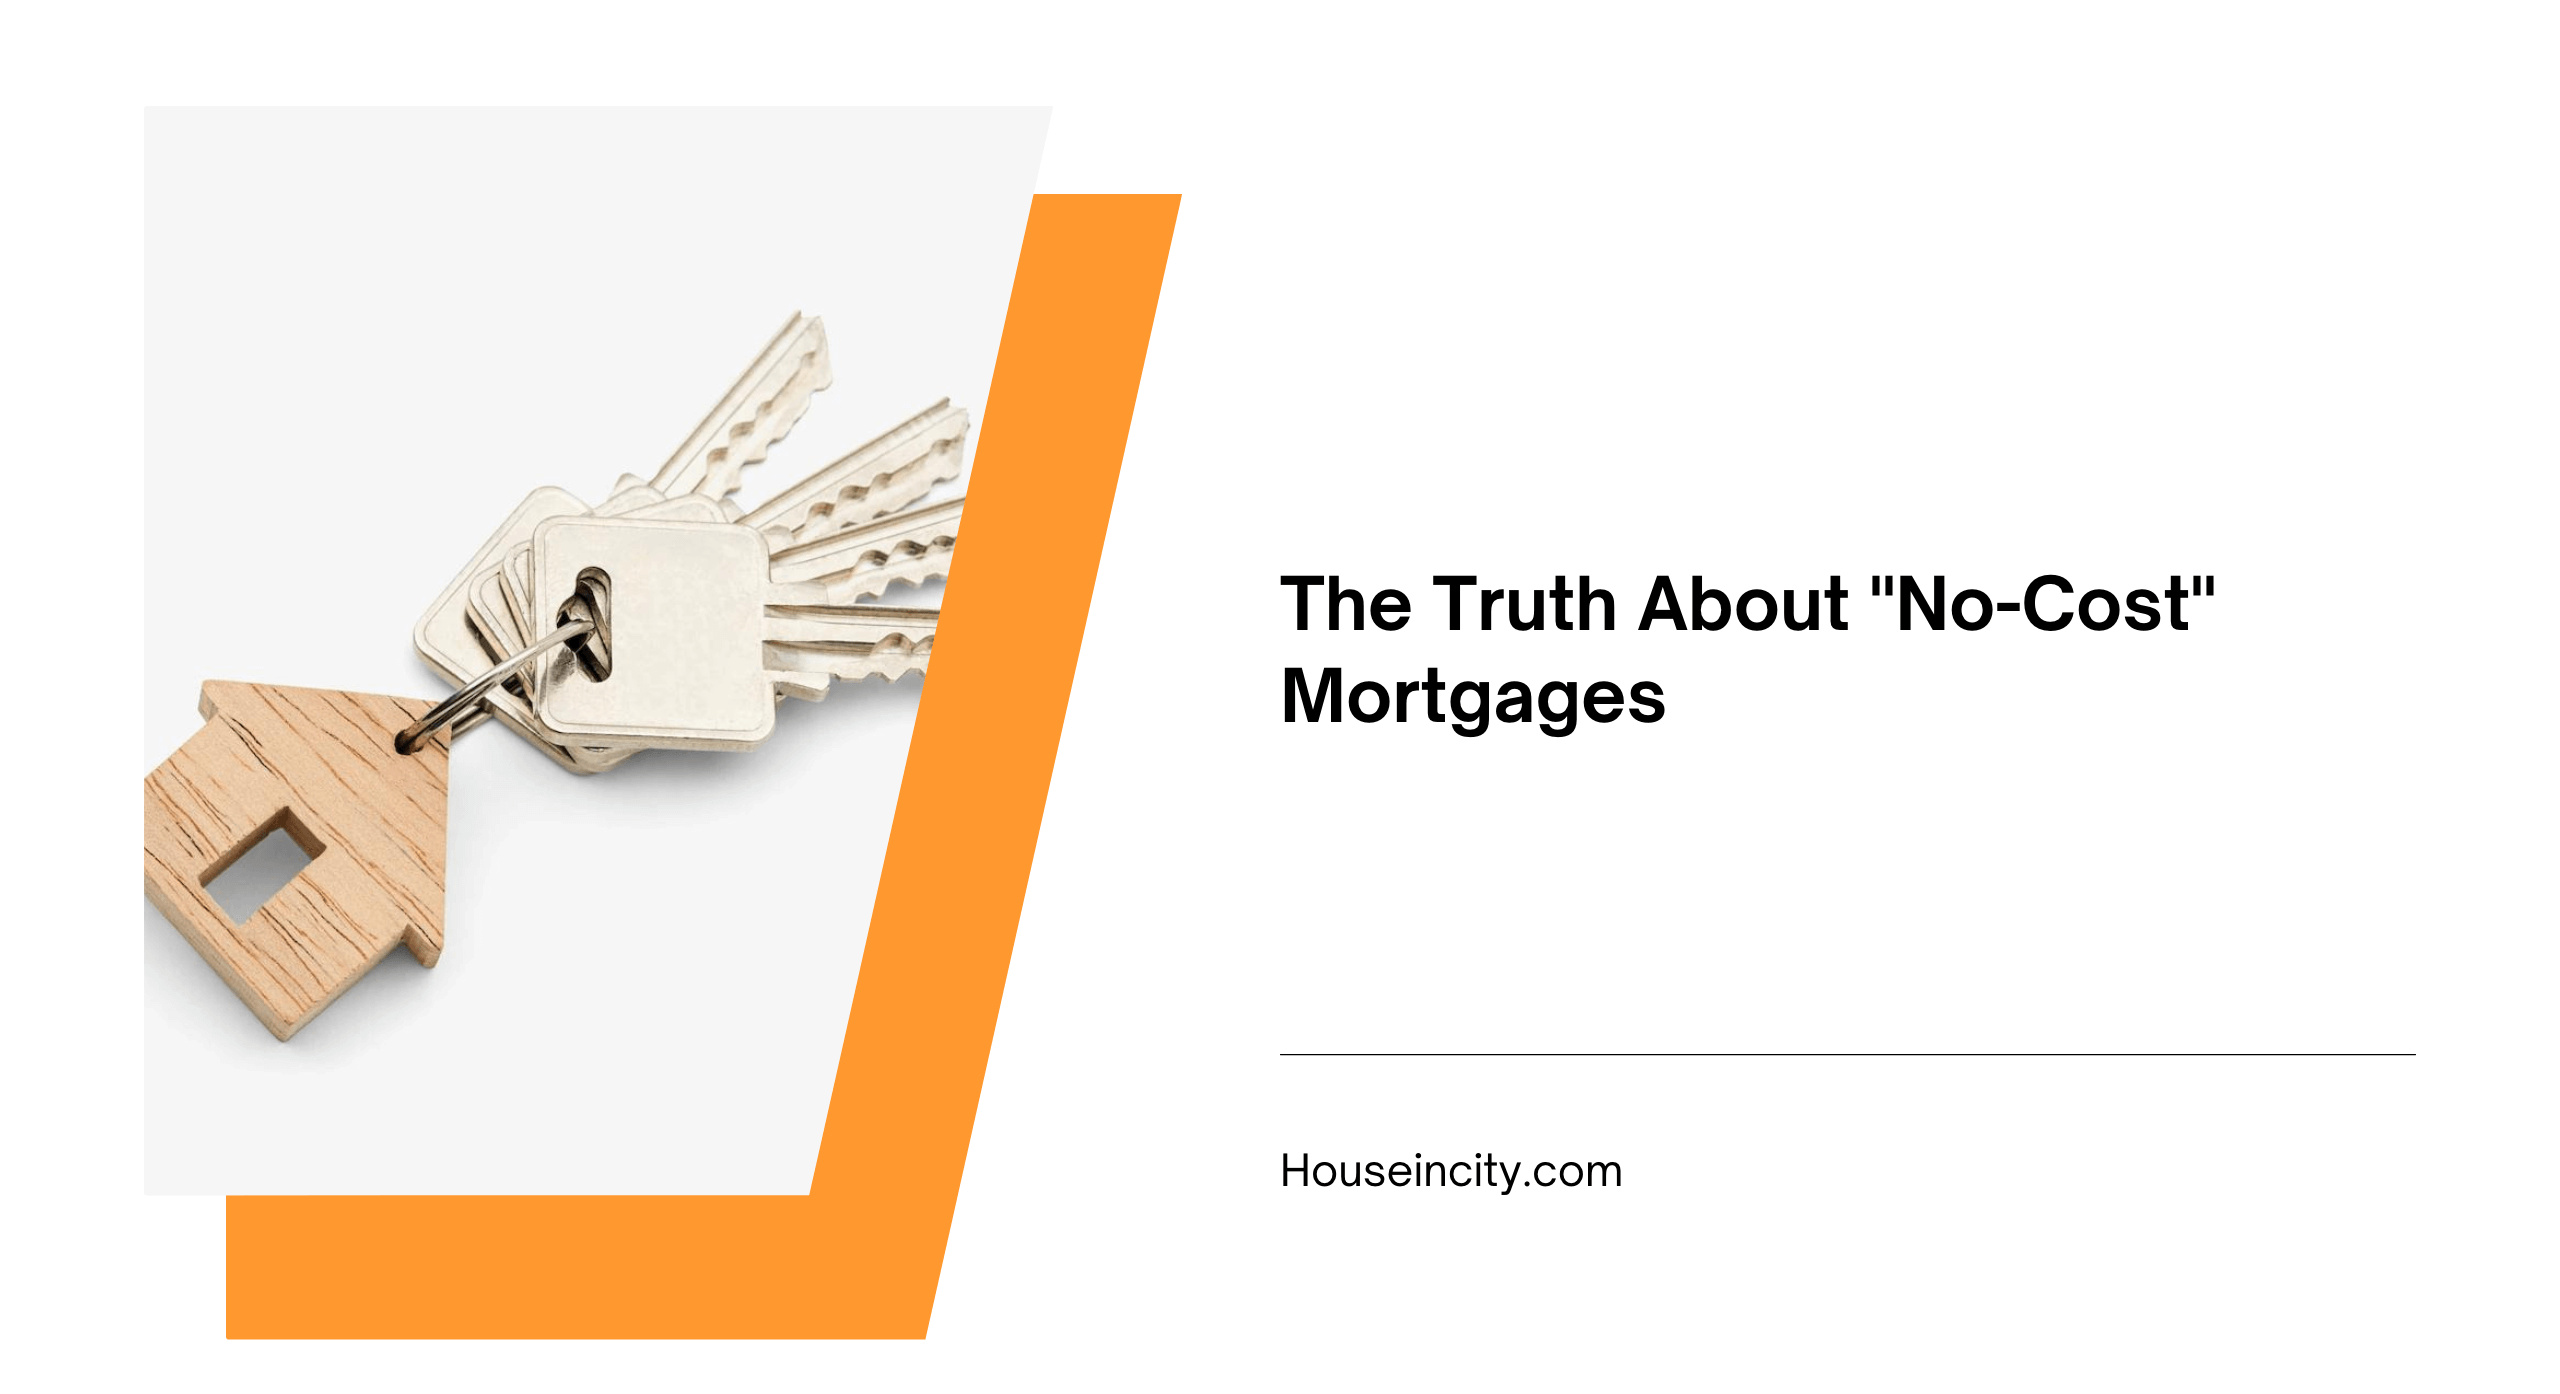 The Truth About "No-Cost" Mortgages